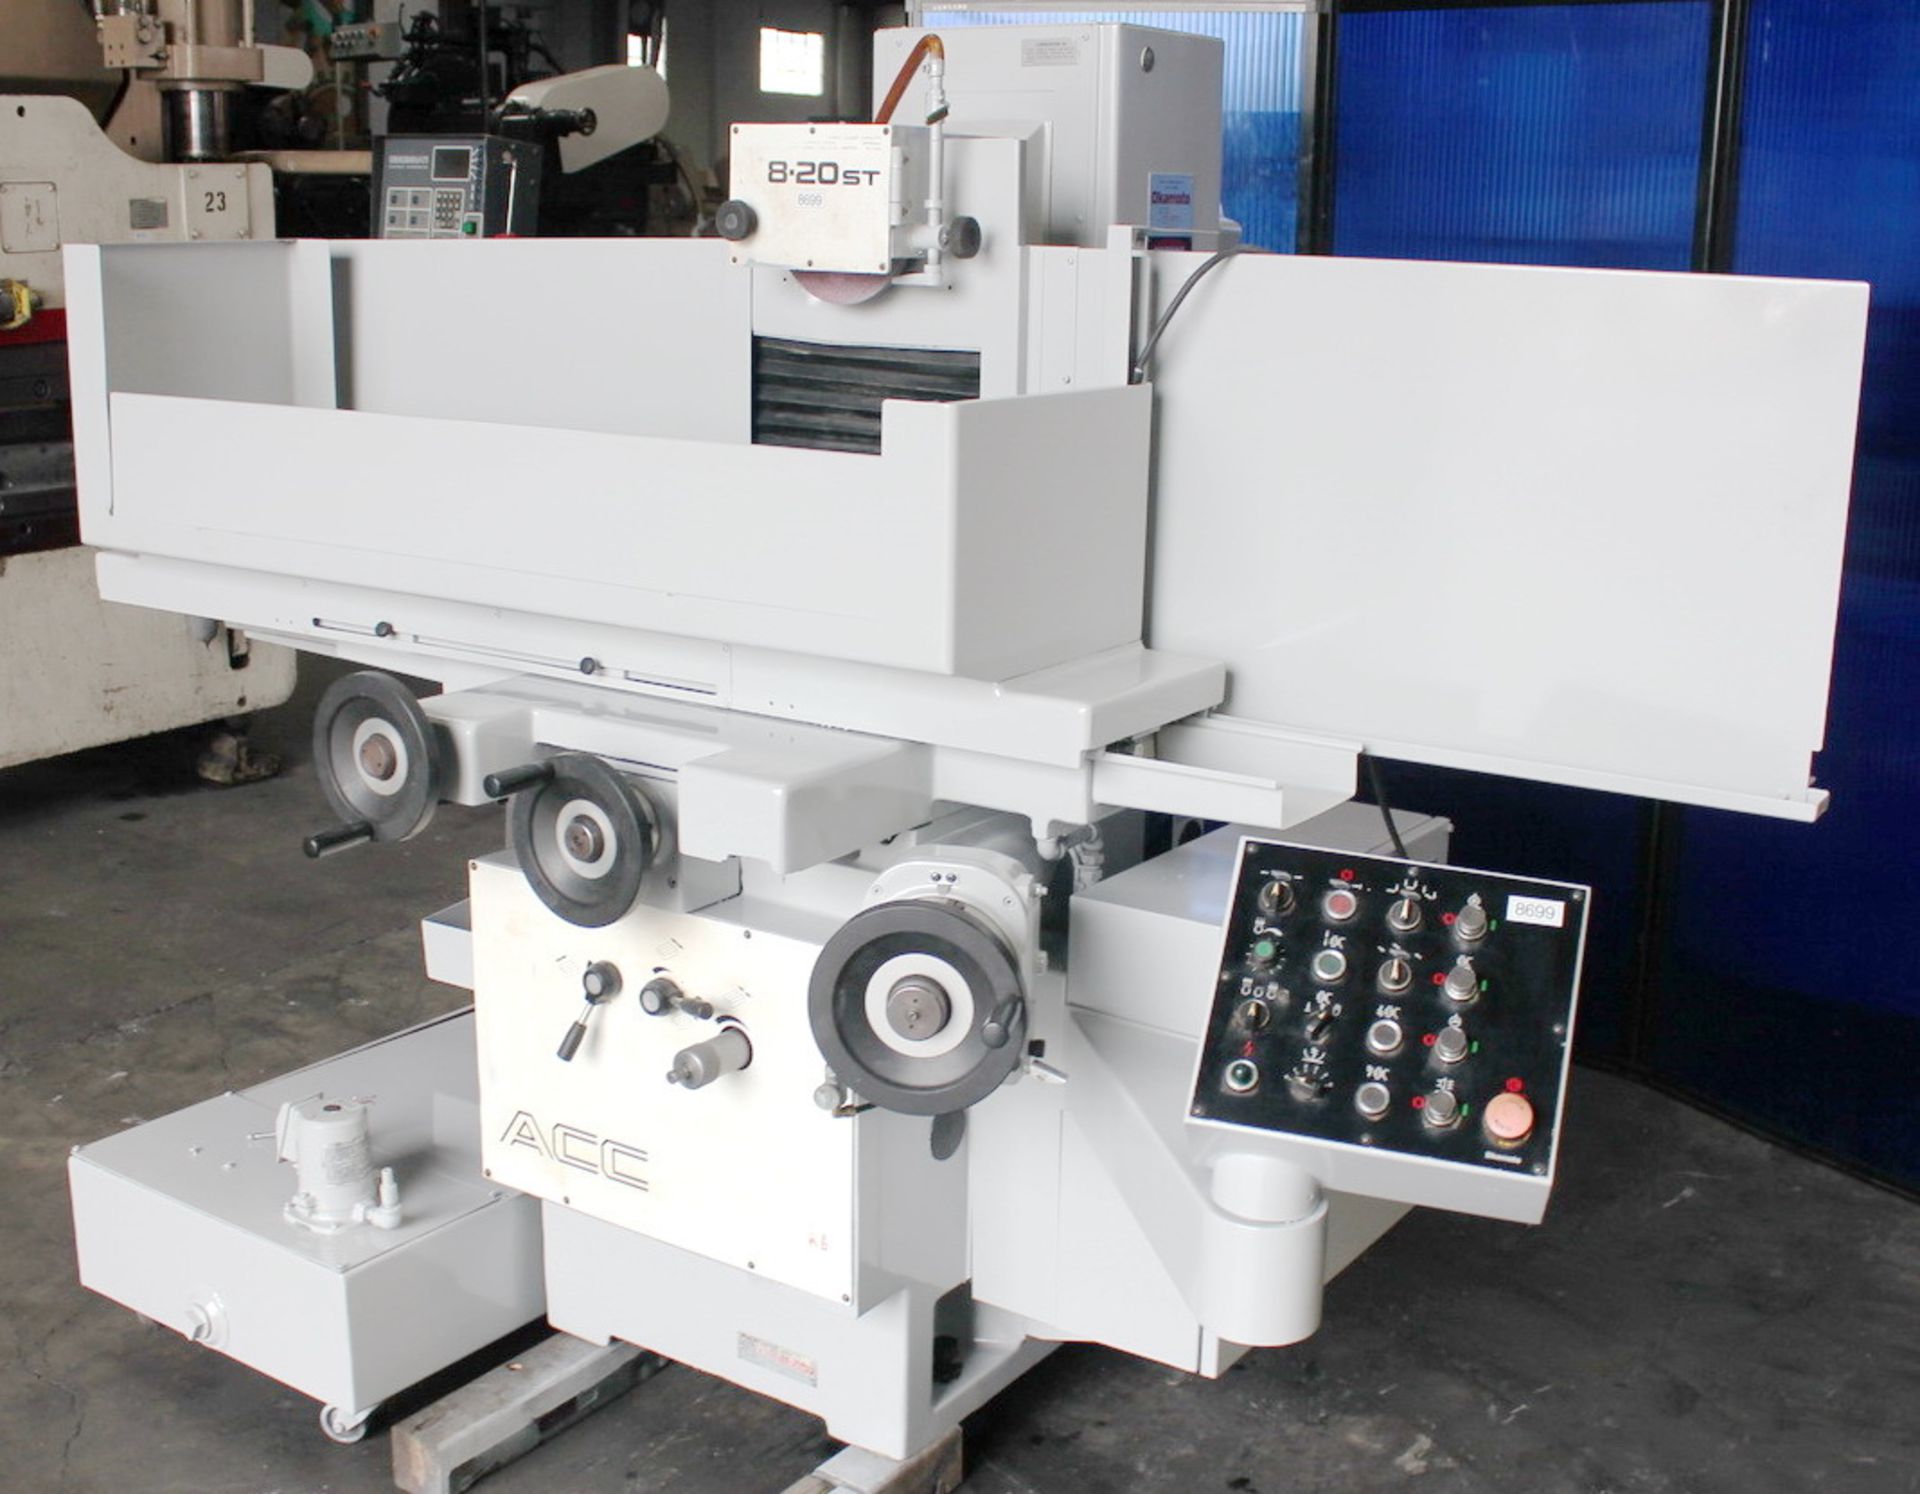 Okamoto Automatic Surface Grinder | 8" x 20", Mdl: ACC-8-20ST, S/N: 82041 - 8699HP - Image 5 of 26